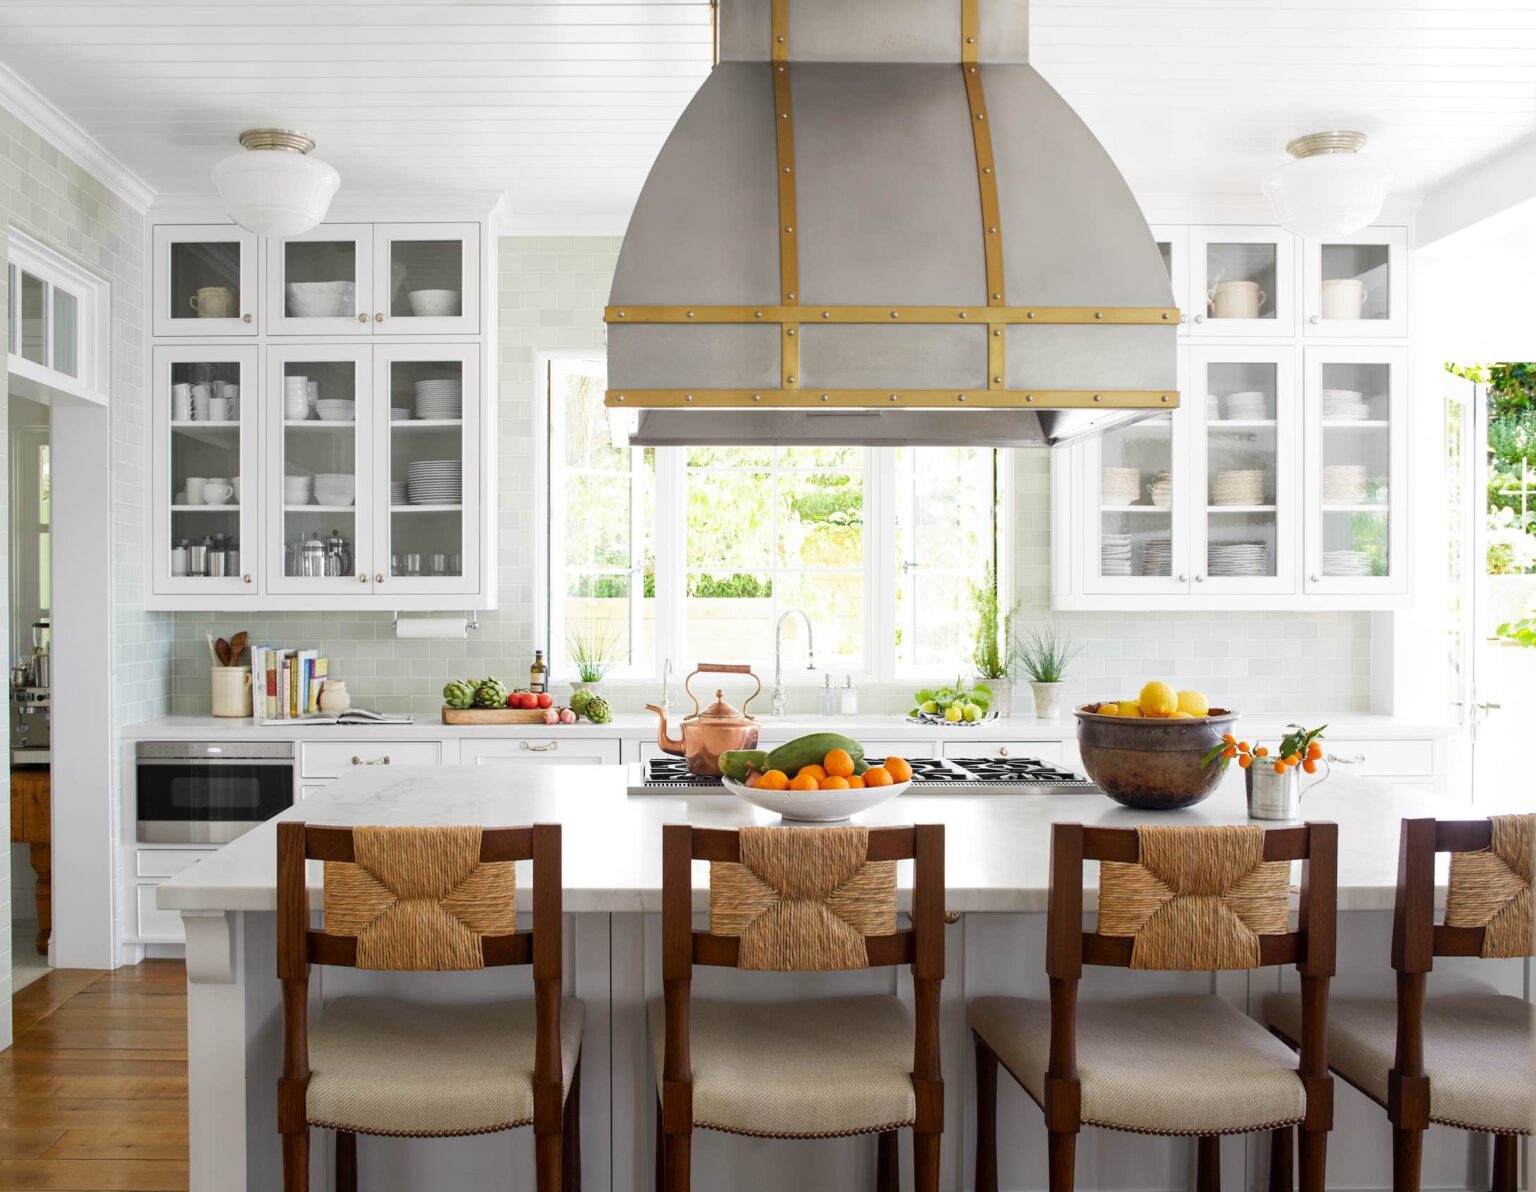 It's always worth spending a little time and effort decorating the places where you spend the most time. Personalize your kitchen today with these tips.